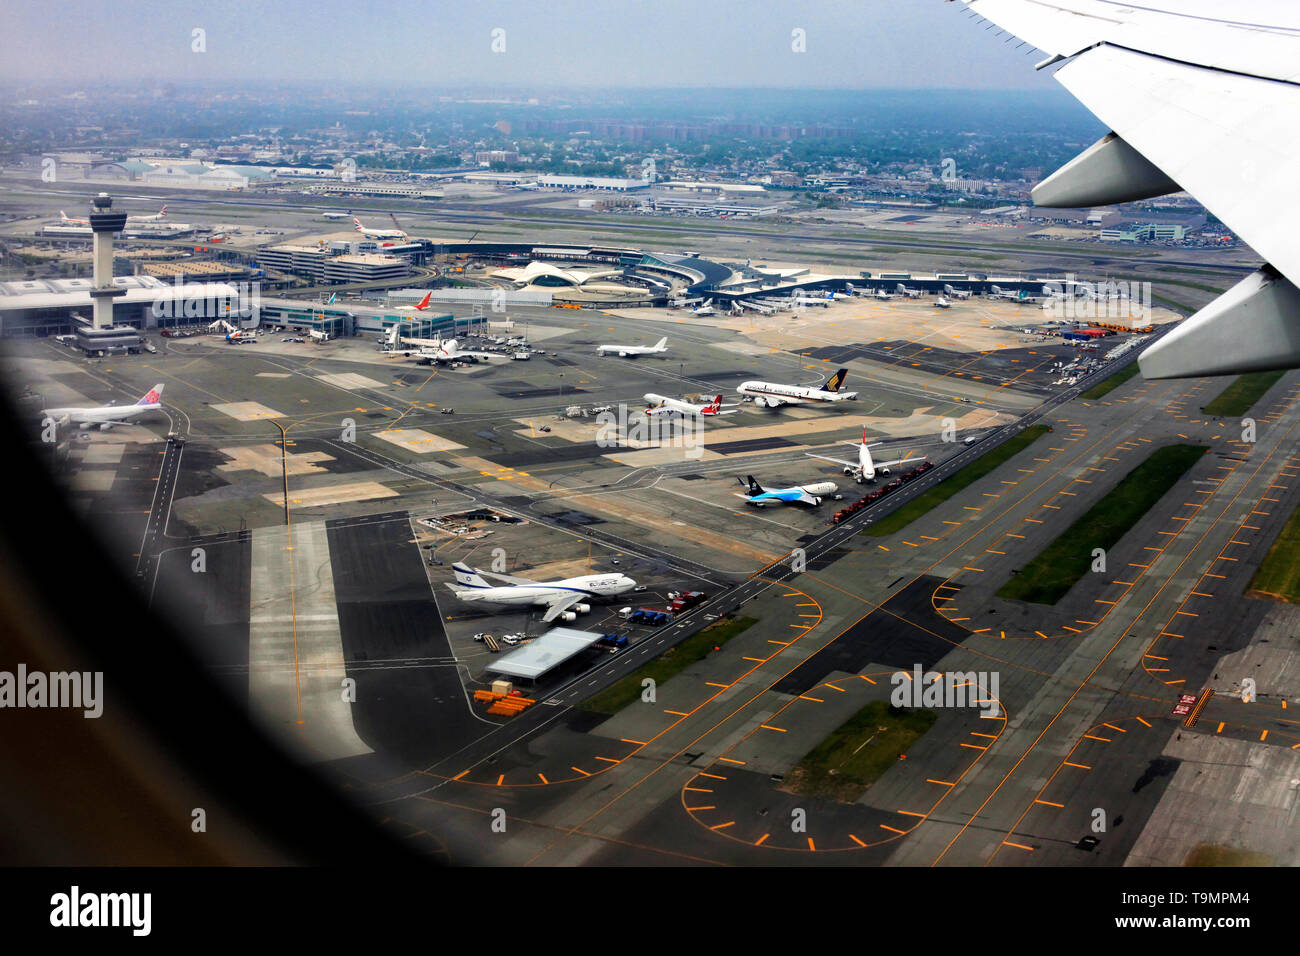 New York, NY, USA- May 20, 2013: Aerial view of John F. Kennedy International Airport in New York Stock Photo